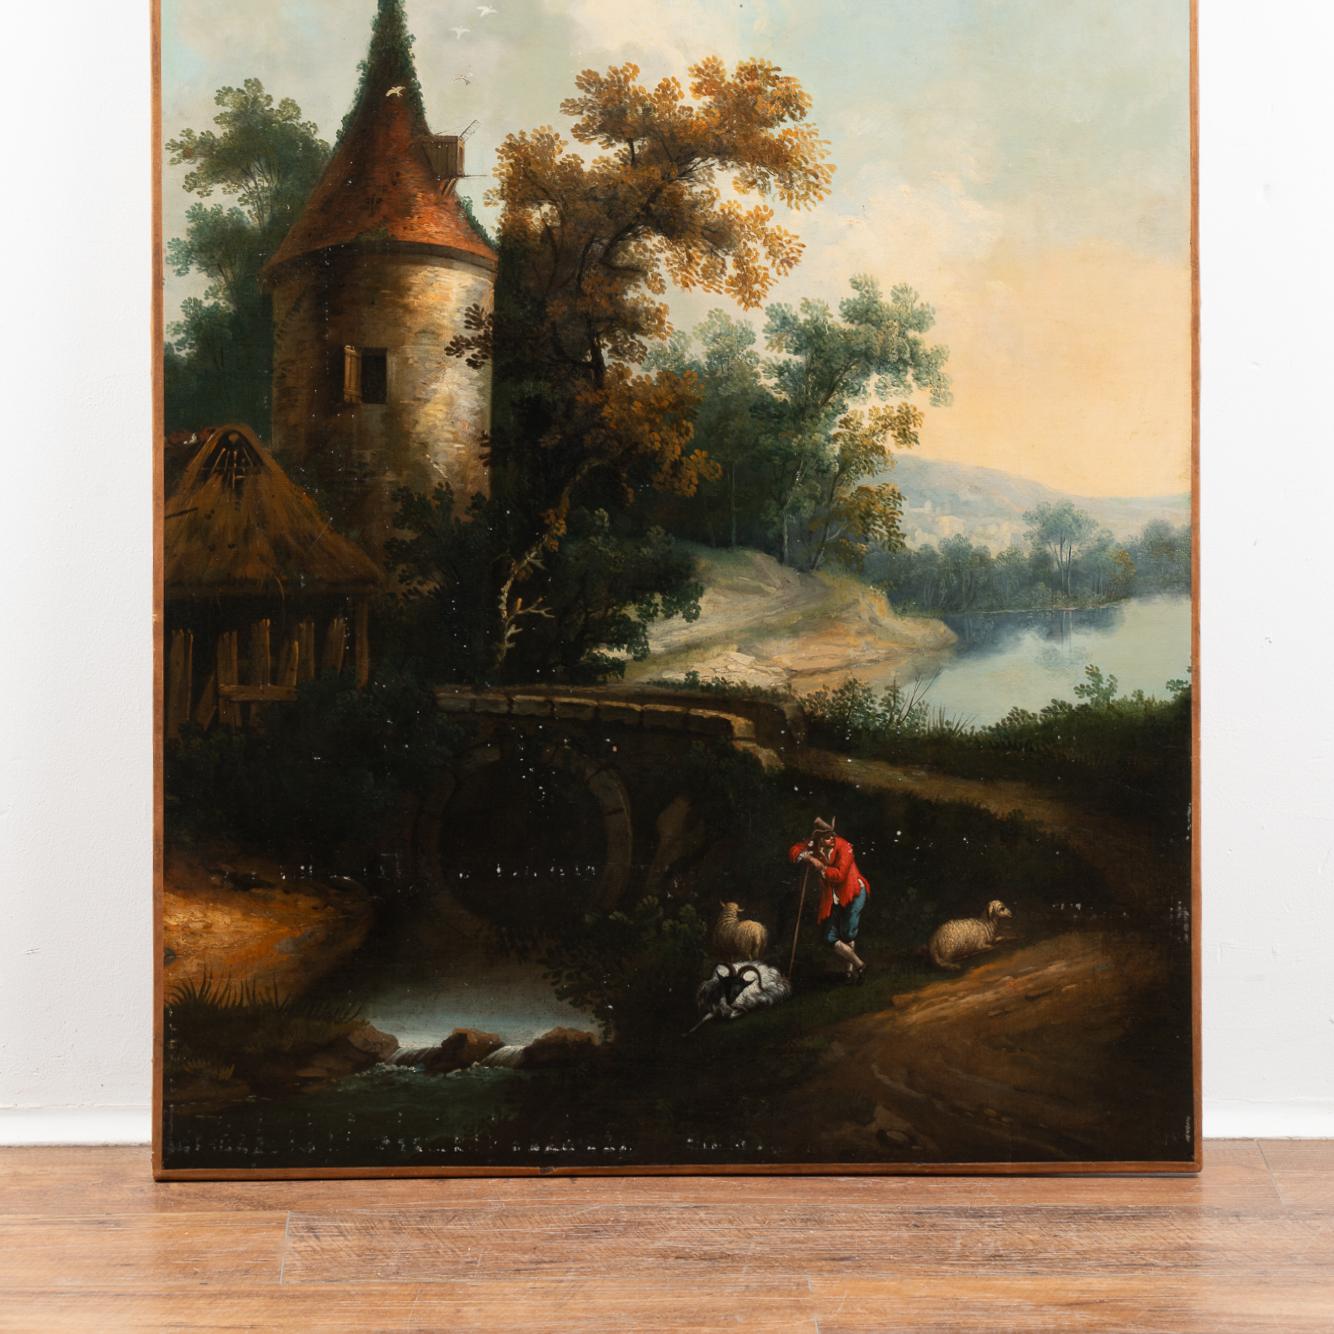 German Original Oil on Canvas Painting of Shepherd at River in Evening, circa 1790-1810